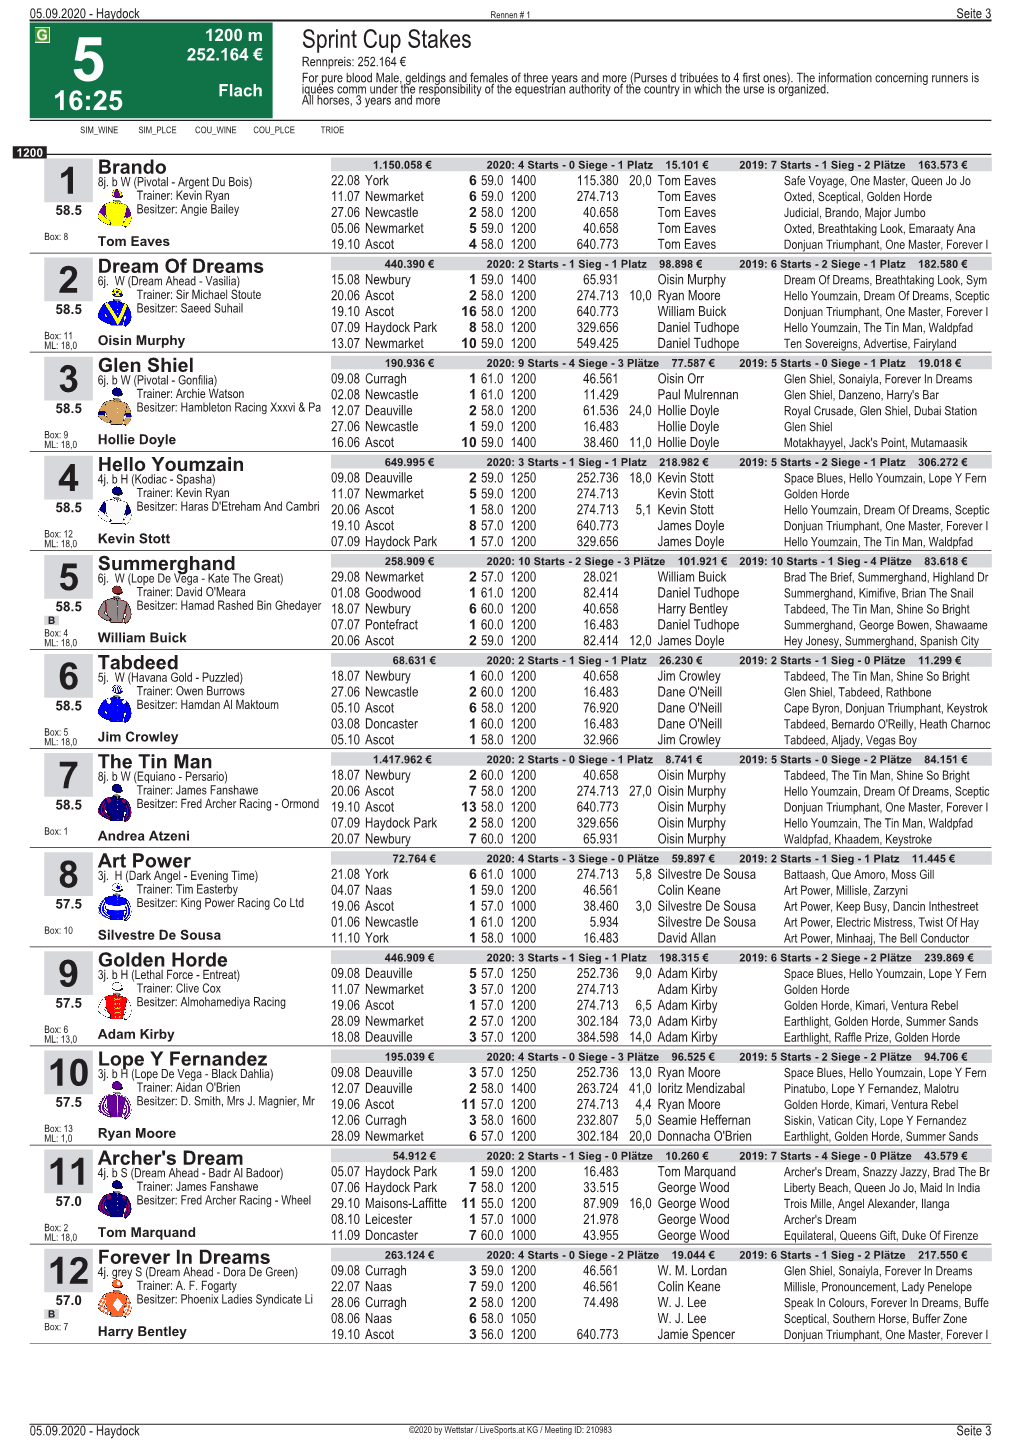 Sprint Cup Stakes 252.164 € Rennpreis: 252.164 € 5 for Pure Blood Male, Geldings and Females of Three Years and More (Purses D Tribuées to 4 First Ones)